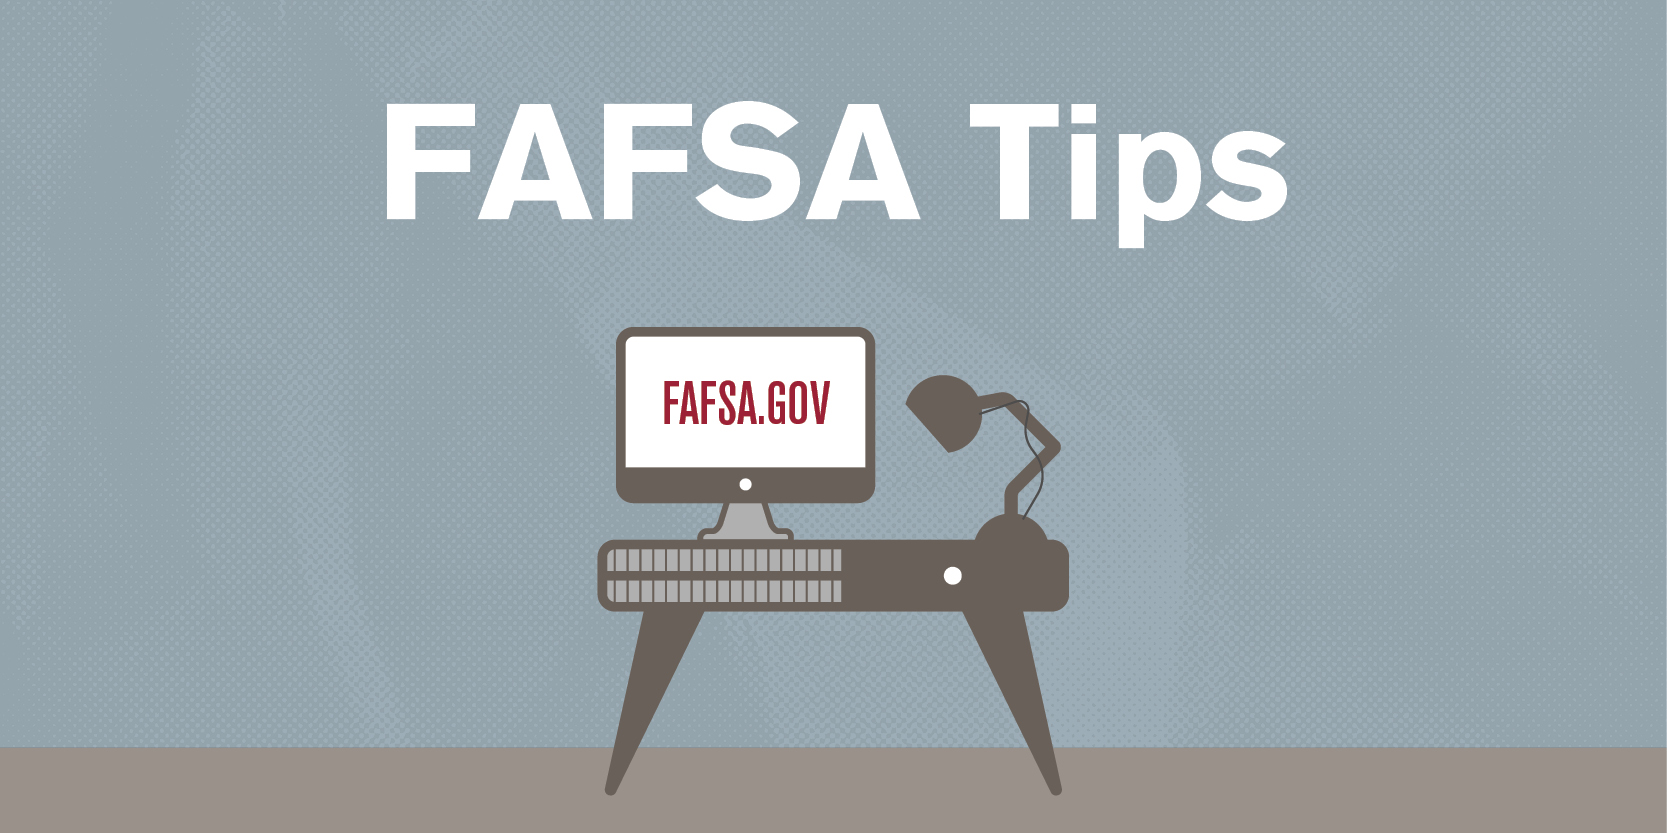 Transylvania applicants: Here are 5 tips for filling out your FAFSA